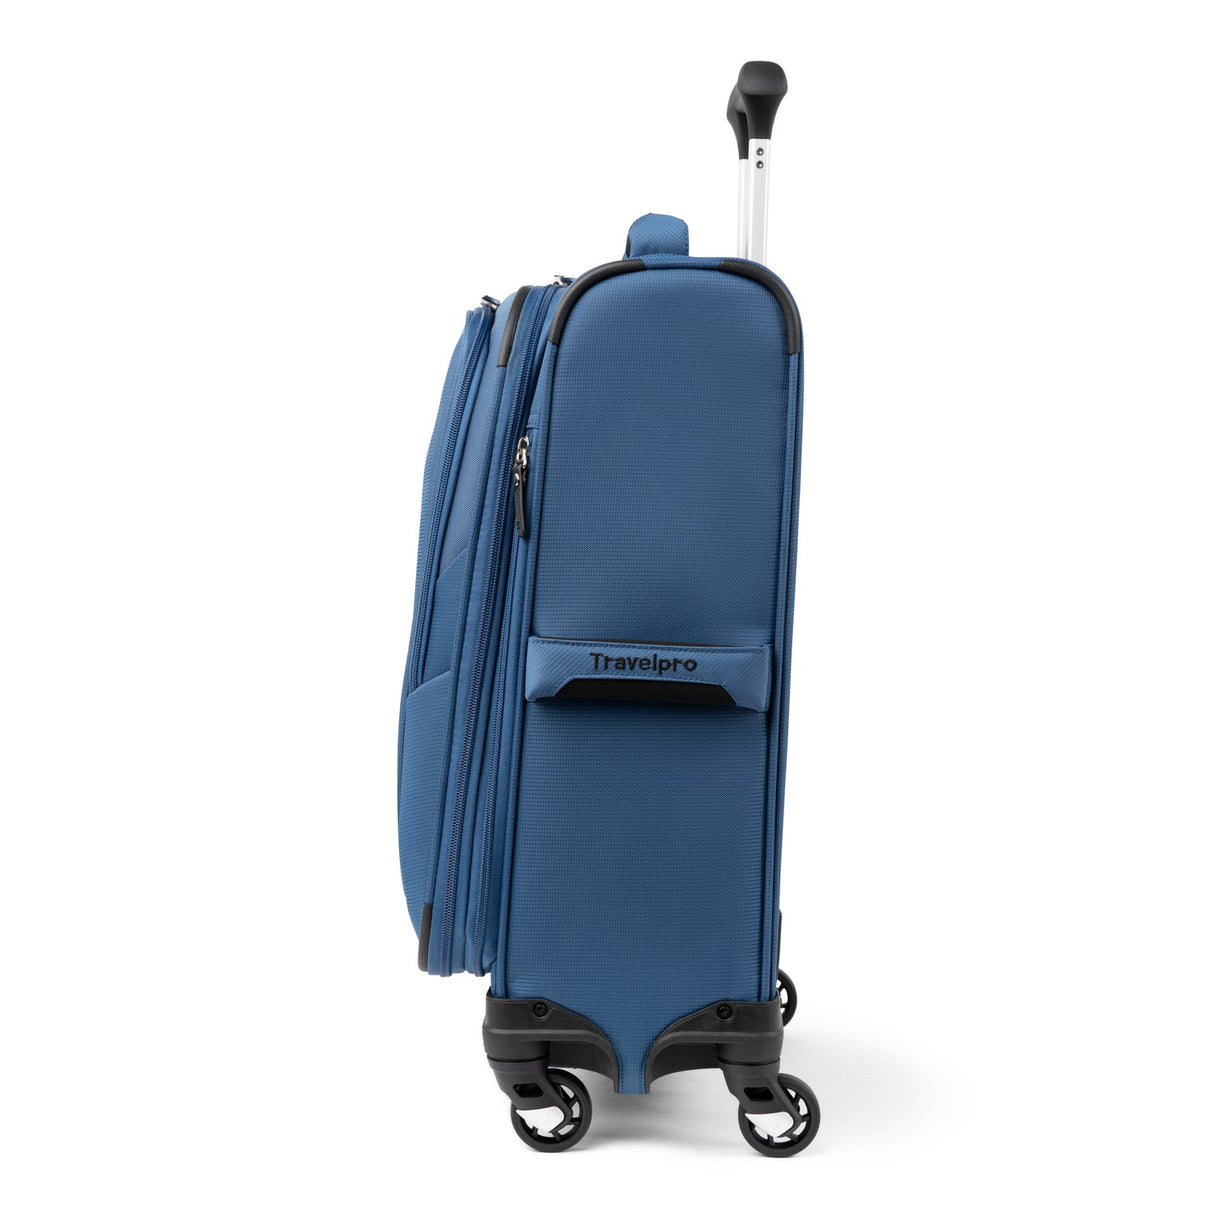 Travelpro Maxlite 5 Compact Carry-On Expandable Spinner , , 401176247_side-1500x1500-f3a2c67_1024x1024_2x_ad0c31d5-25d4-4834-817a-30dff2a75042